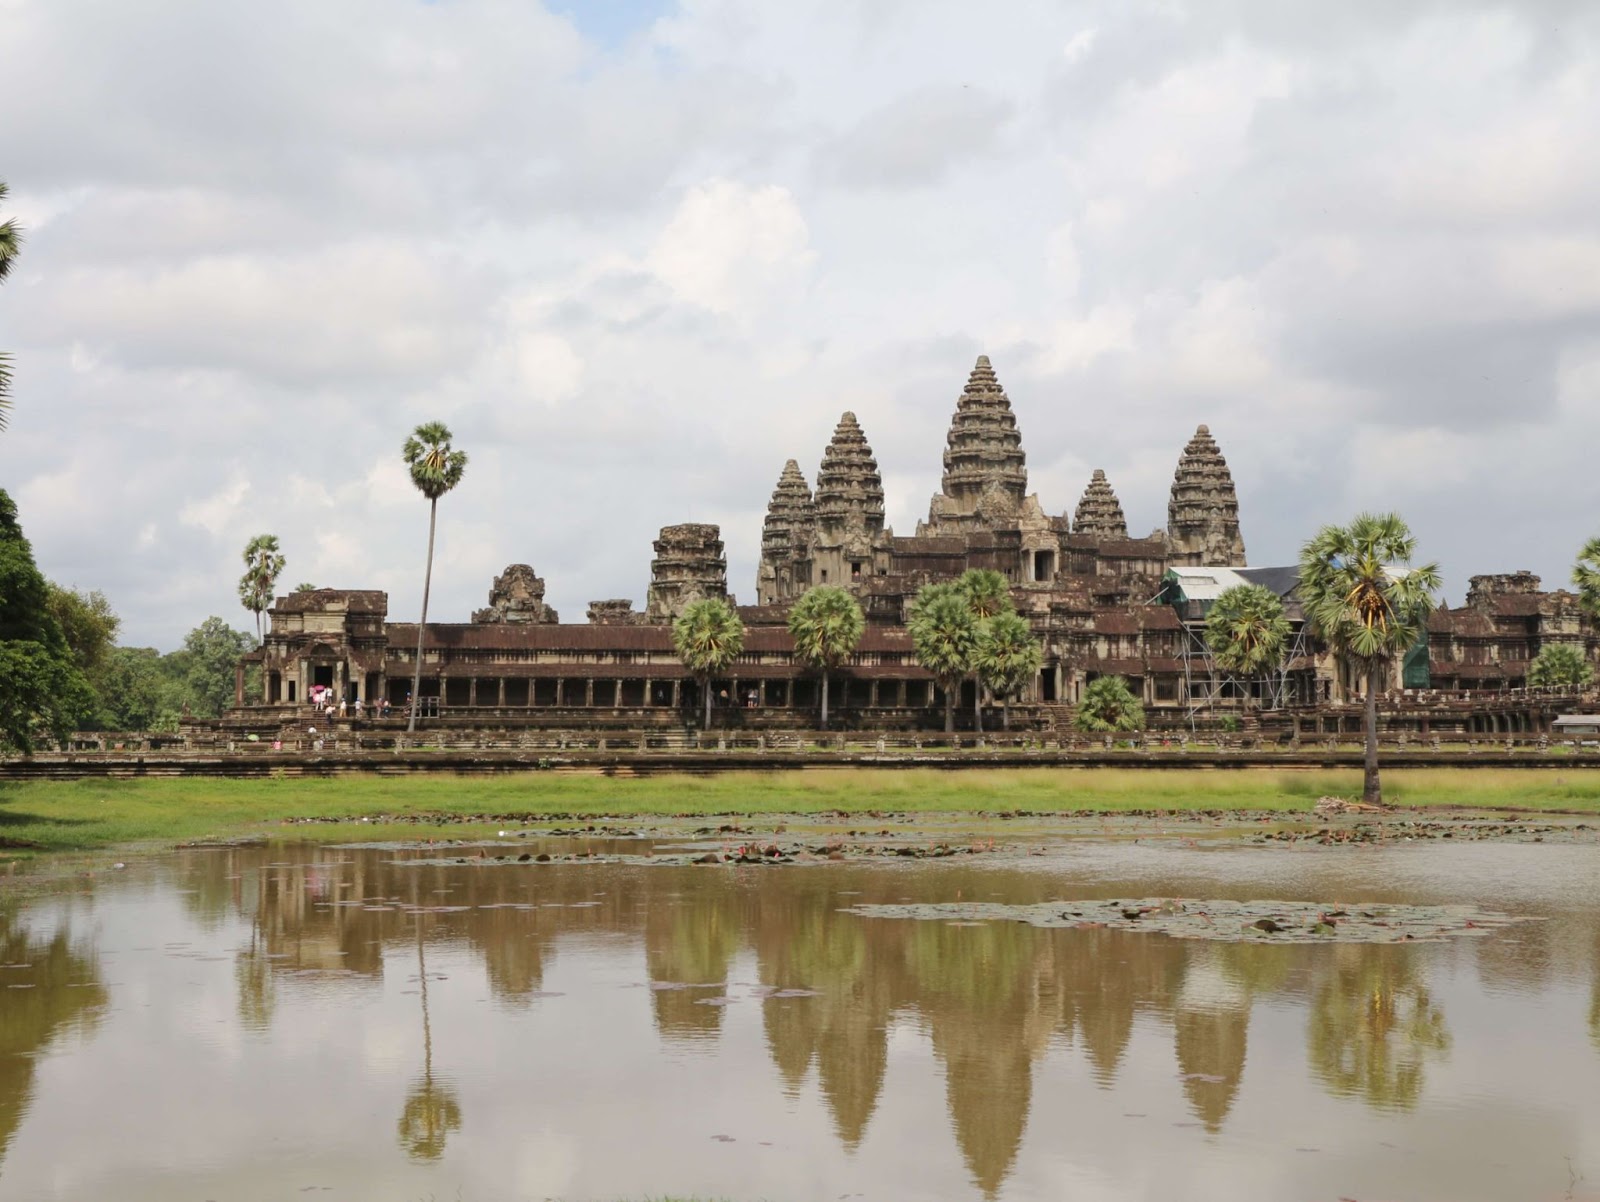 reasons to visit Angkor Wat. This is an image of Angkor Wat from one of the reflection ponds at noon.